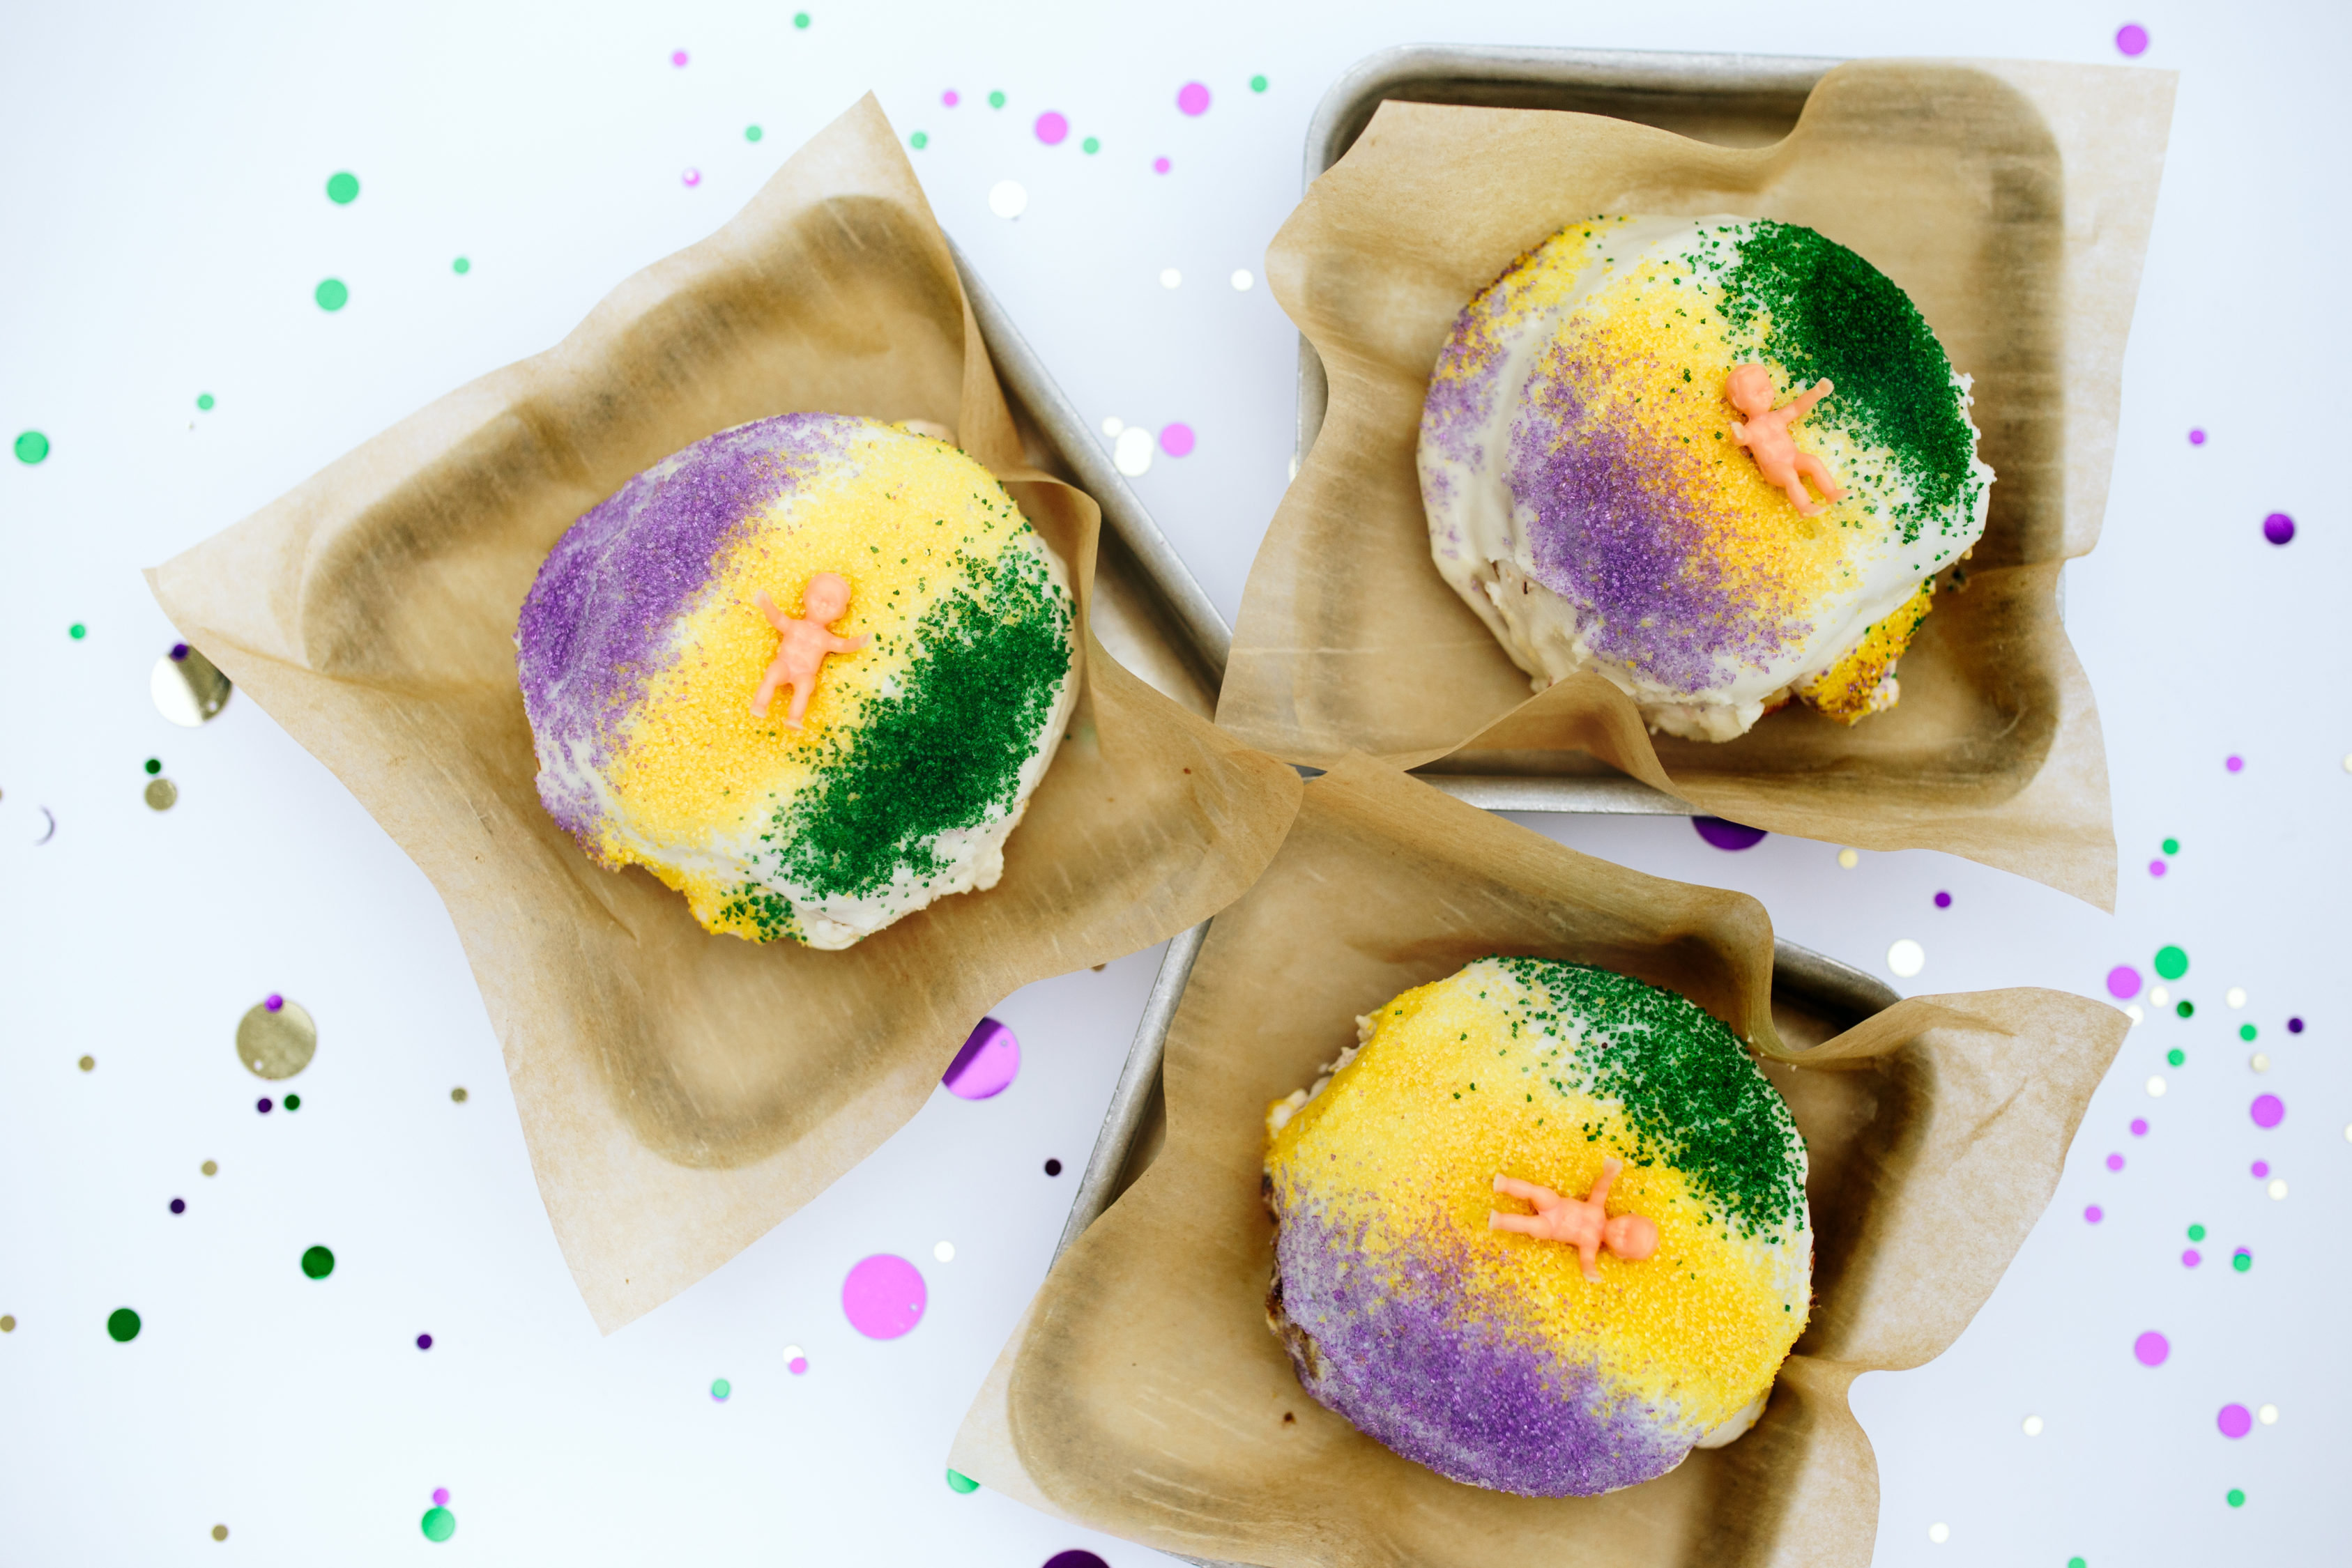 New Orleans bakeries do big business during Mardi Gras with king cakes